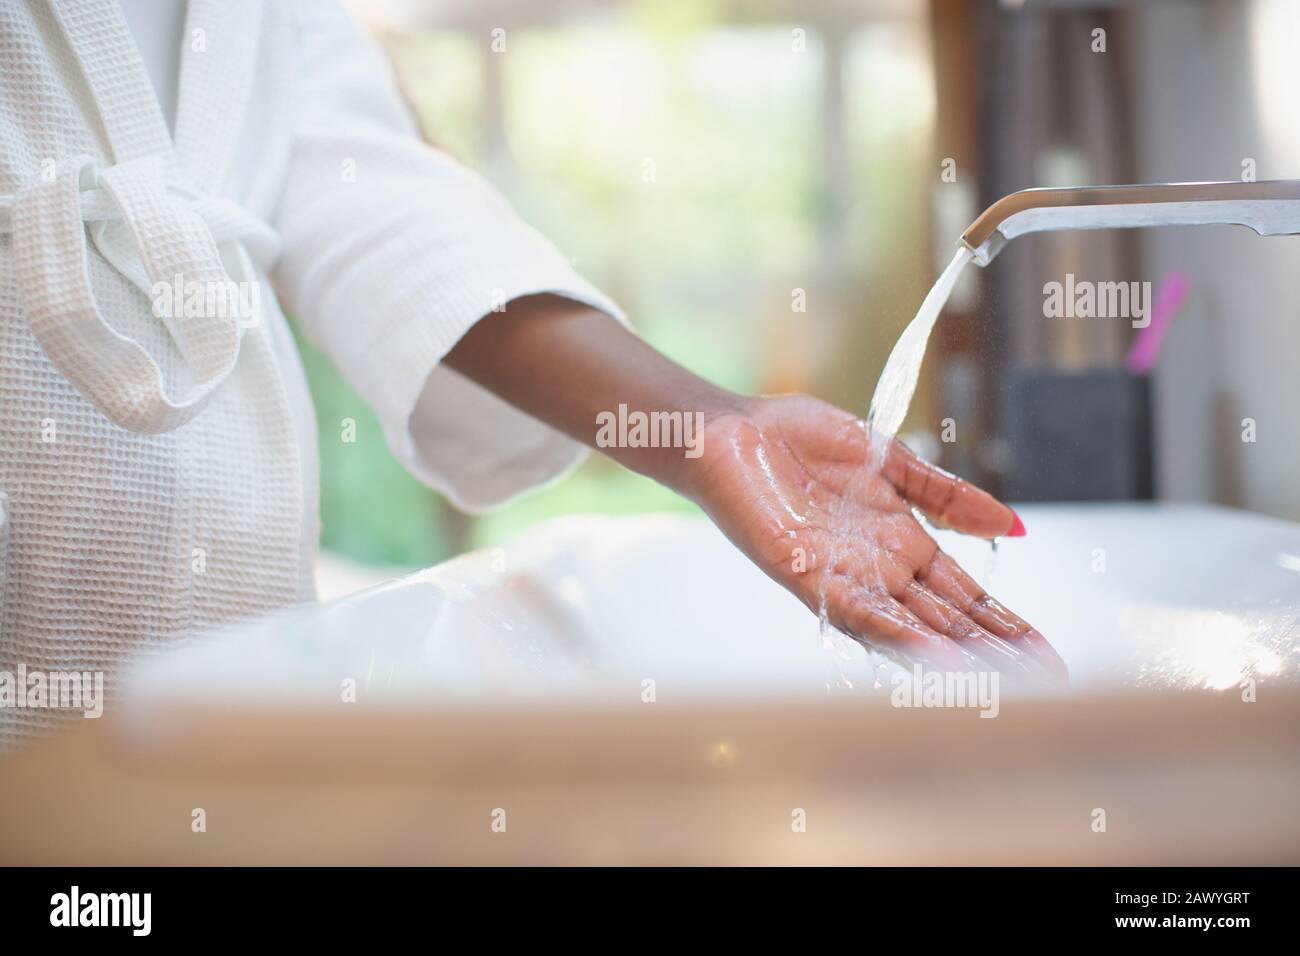 Woman with hand under bathroom water faucet Stock Photo